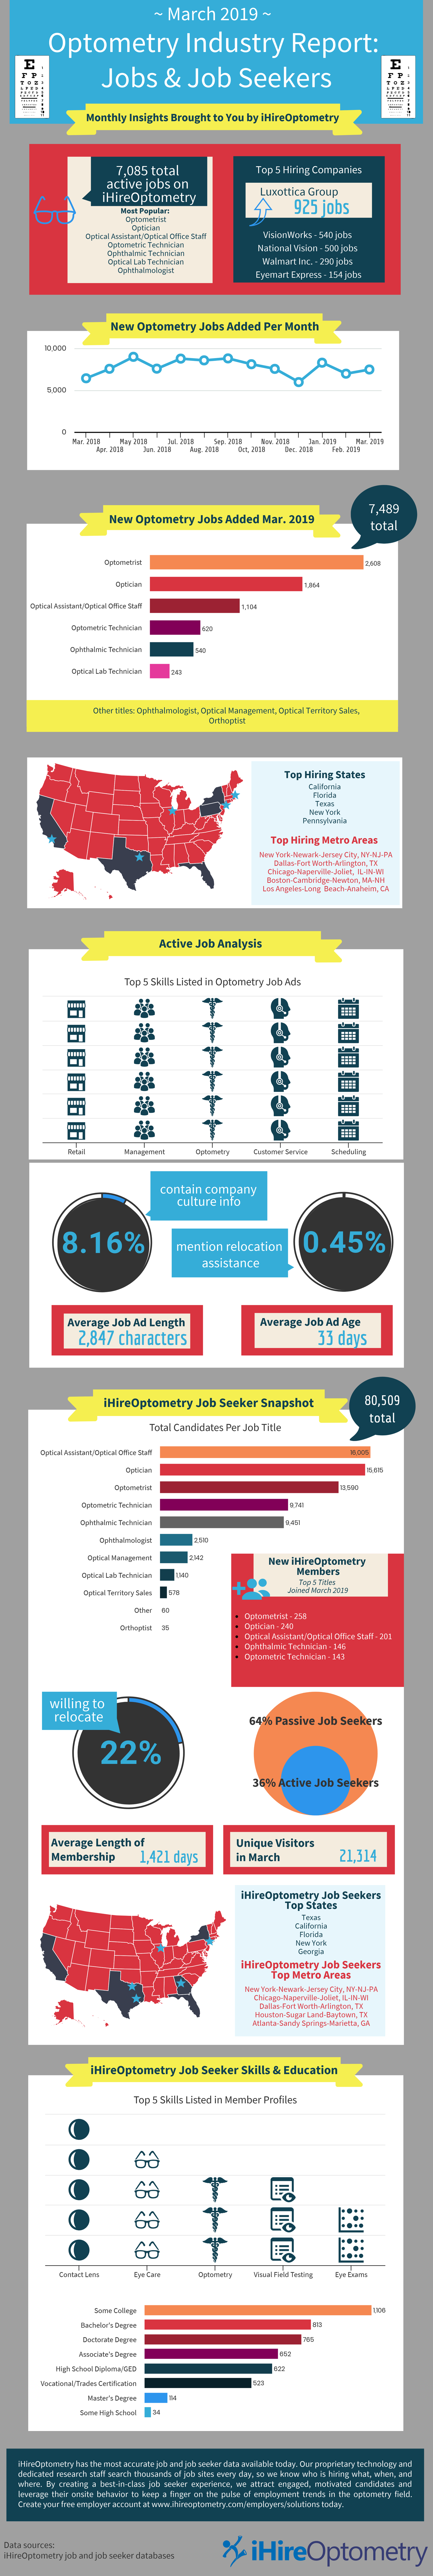 ihireoptometry march 2019 optometry industry infographic